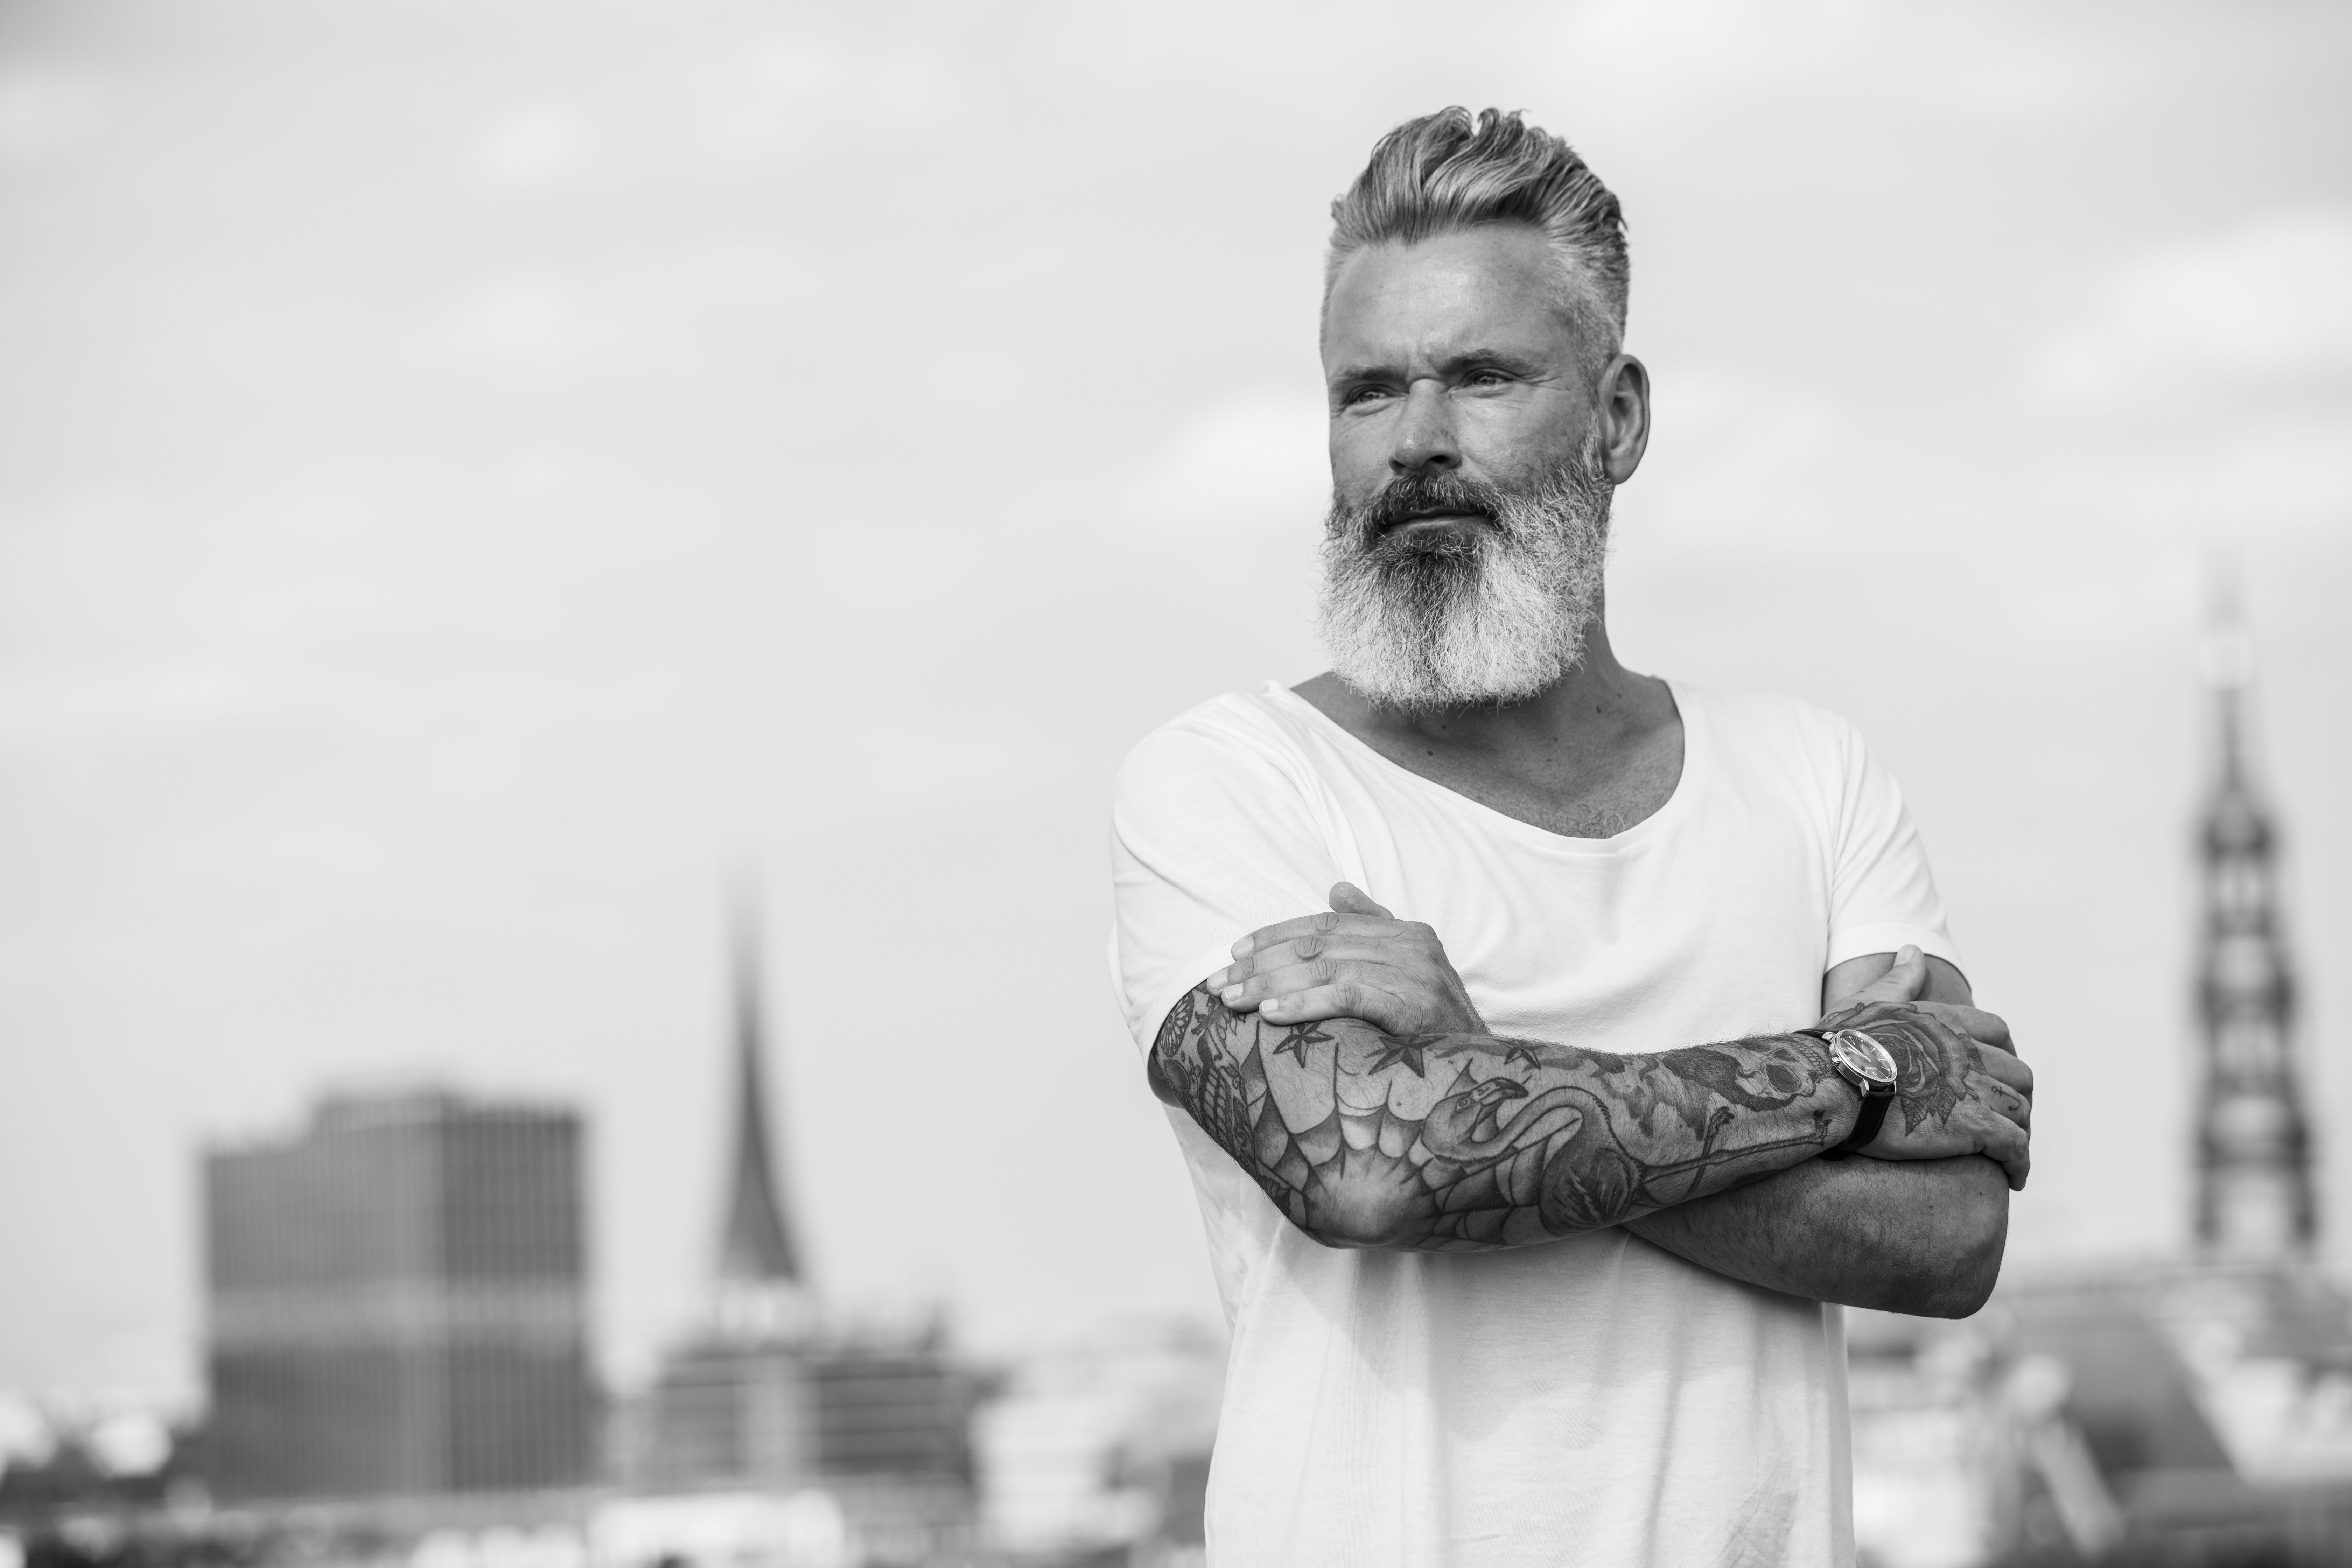 Photo of a bearded, tattooed man in a t-shirt wearing a Feynman CWII watch in front of the Hamburg skyline